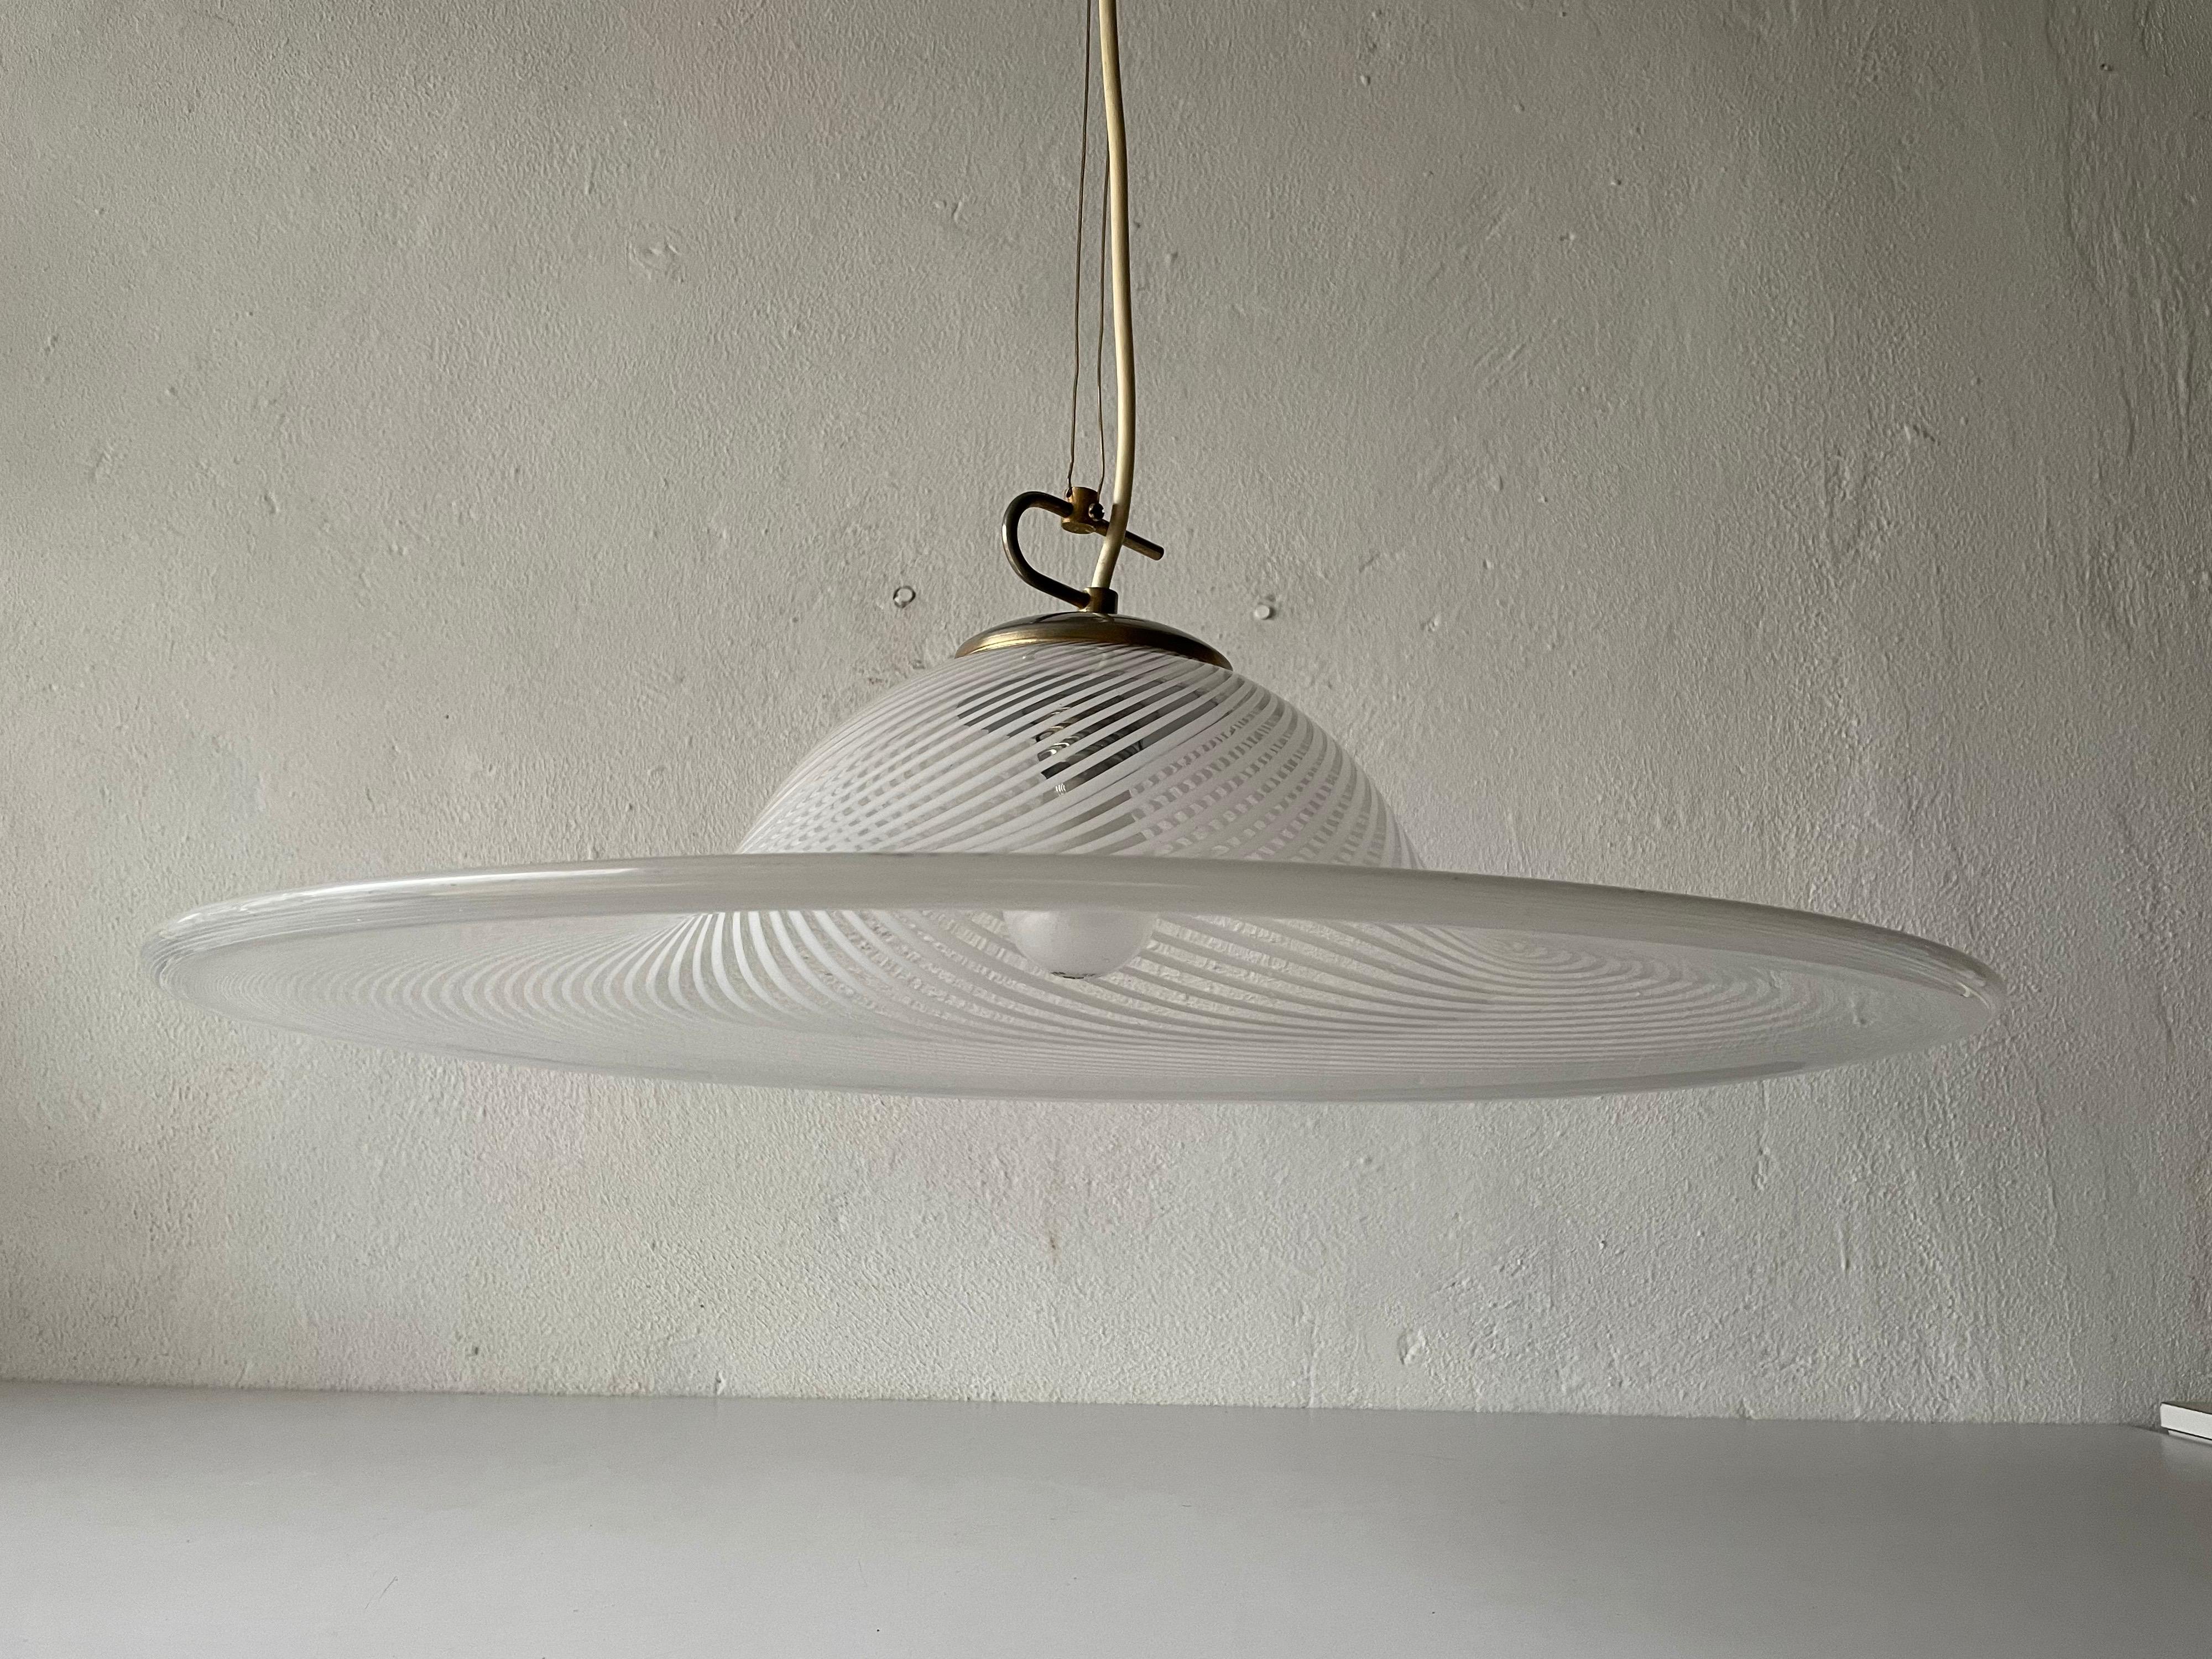 Swirl Printed glass large pendant lamp by Vetri Murano, 1970s, Italy

Elegant and minimal design hanging lamp

Lampshade is in good condition and very clean. 
This lamp works with E27 light bulb. Max 100W
Wired and suitable to use with 220V